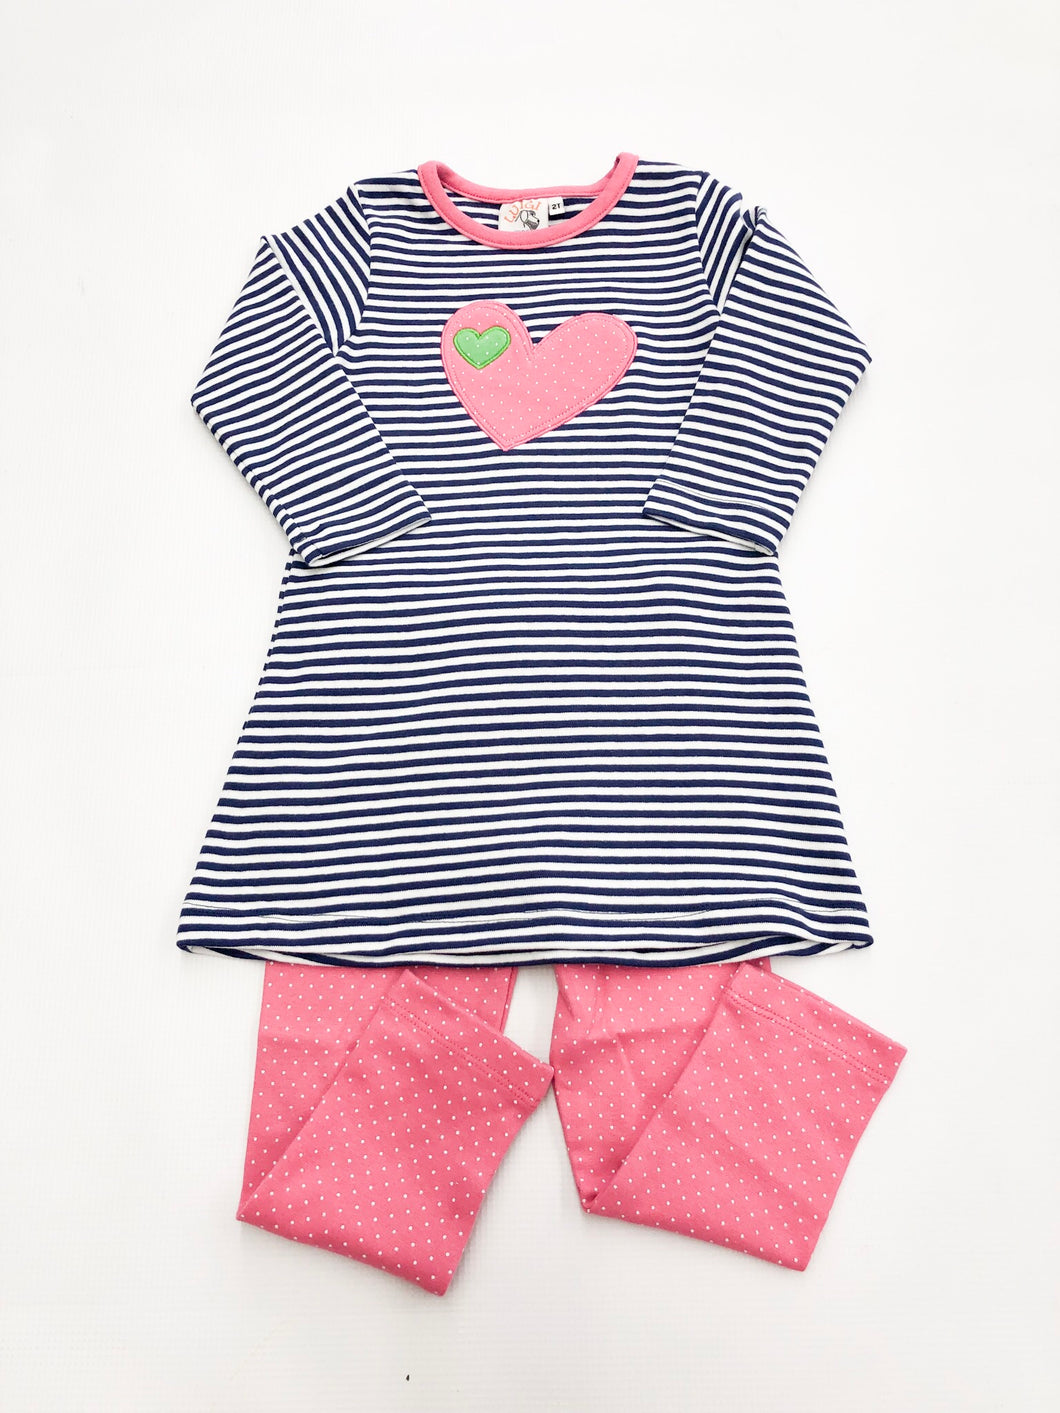 L/S Navy Stripe Tee w Heart and Pink Dot Pant